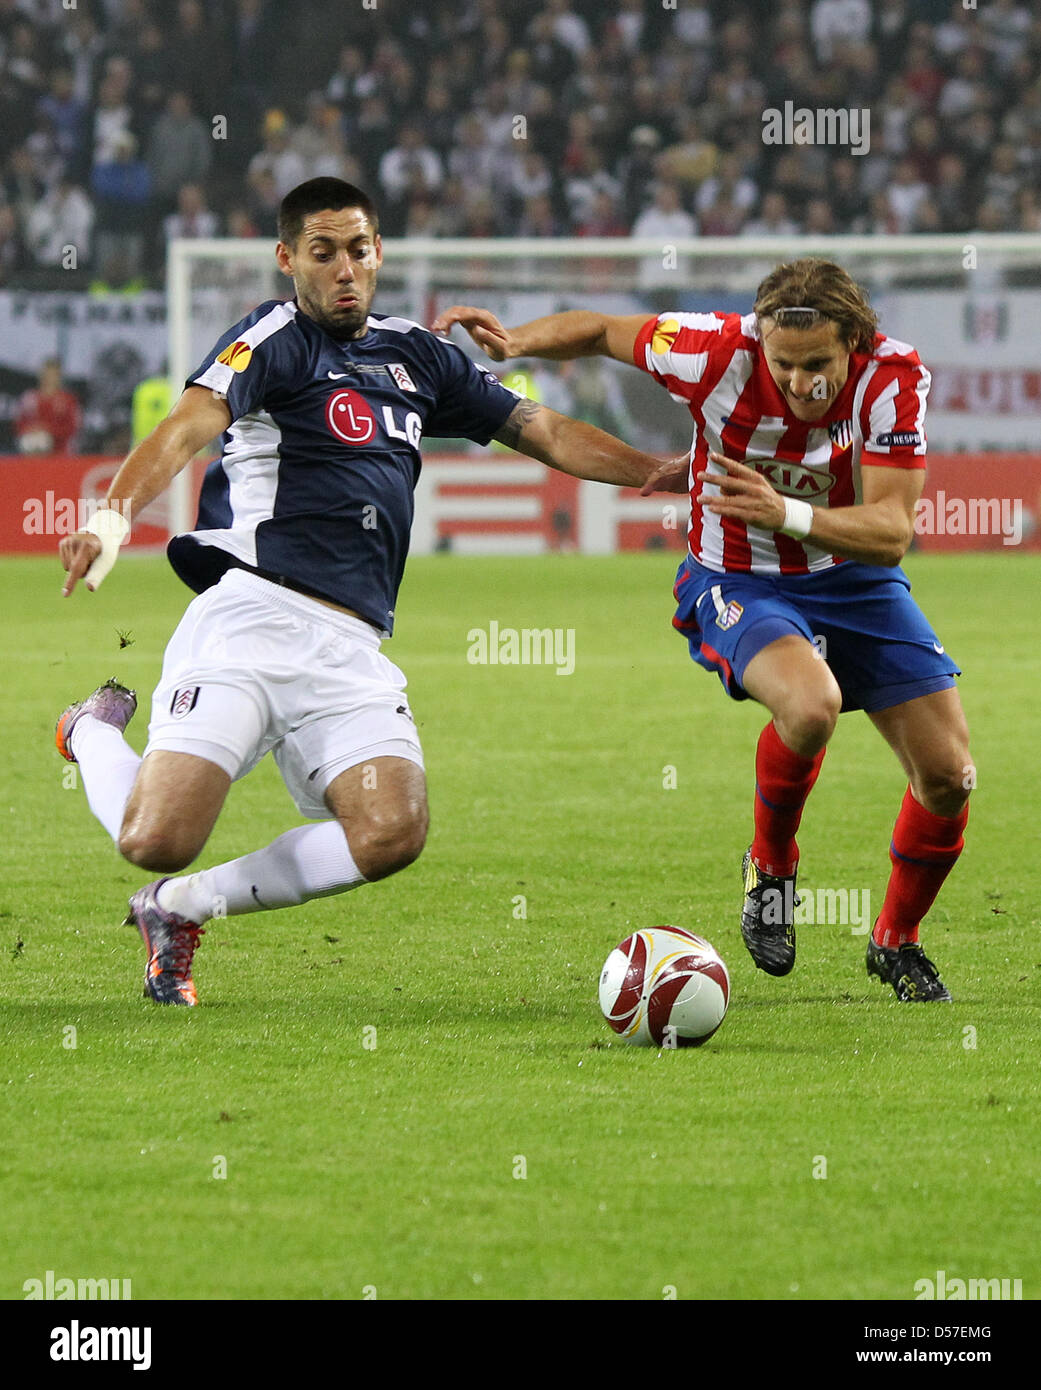 Atletico Madrid's Diego Forlan (R) is tackled by Clint Dempsey (L) of Fulham during the UEFA Europa League final match between FC Fulham and Atletico Madrid at Hamburg Arena, Hamburg, Germany, 12 May 2010. Photo: Kay Nietfeld dpa NO MOBILE DEVICES  +++(c) dpa - Bildfunk+++ Stock Photo